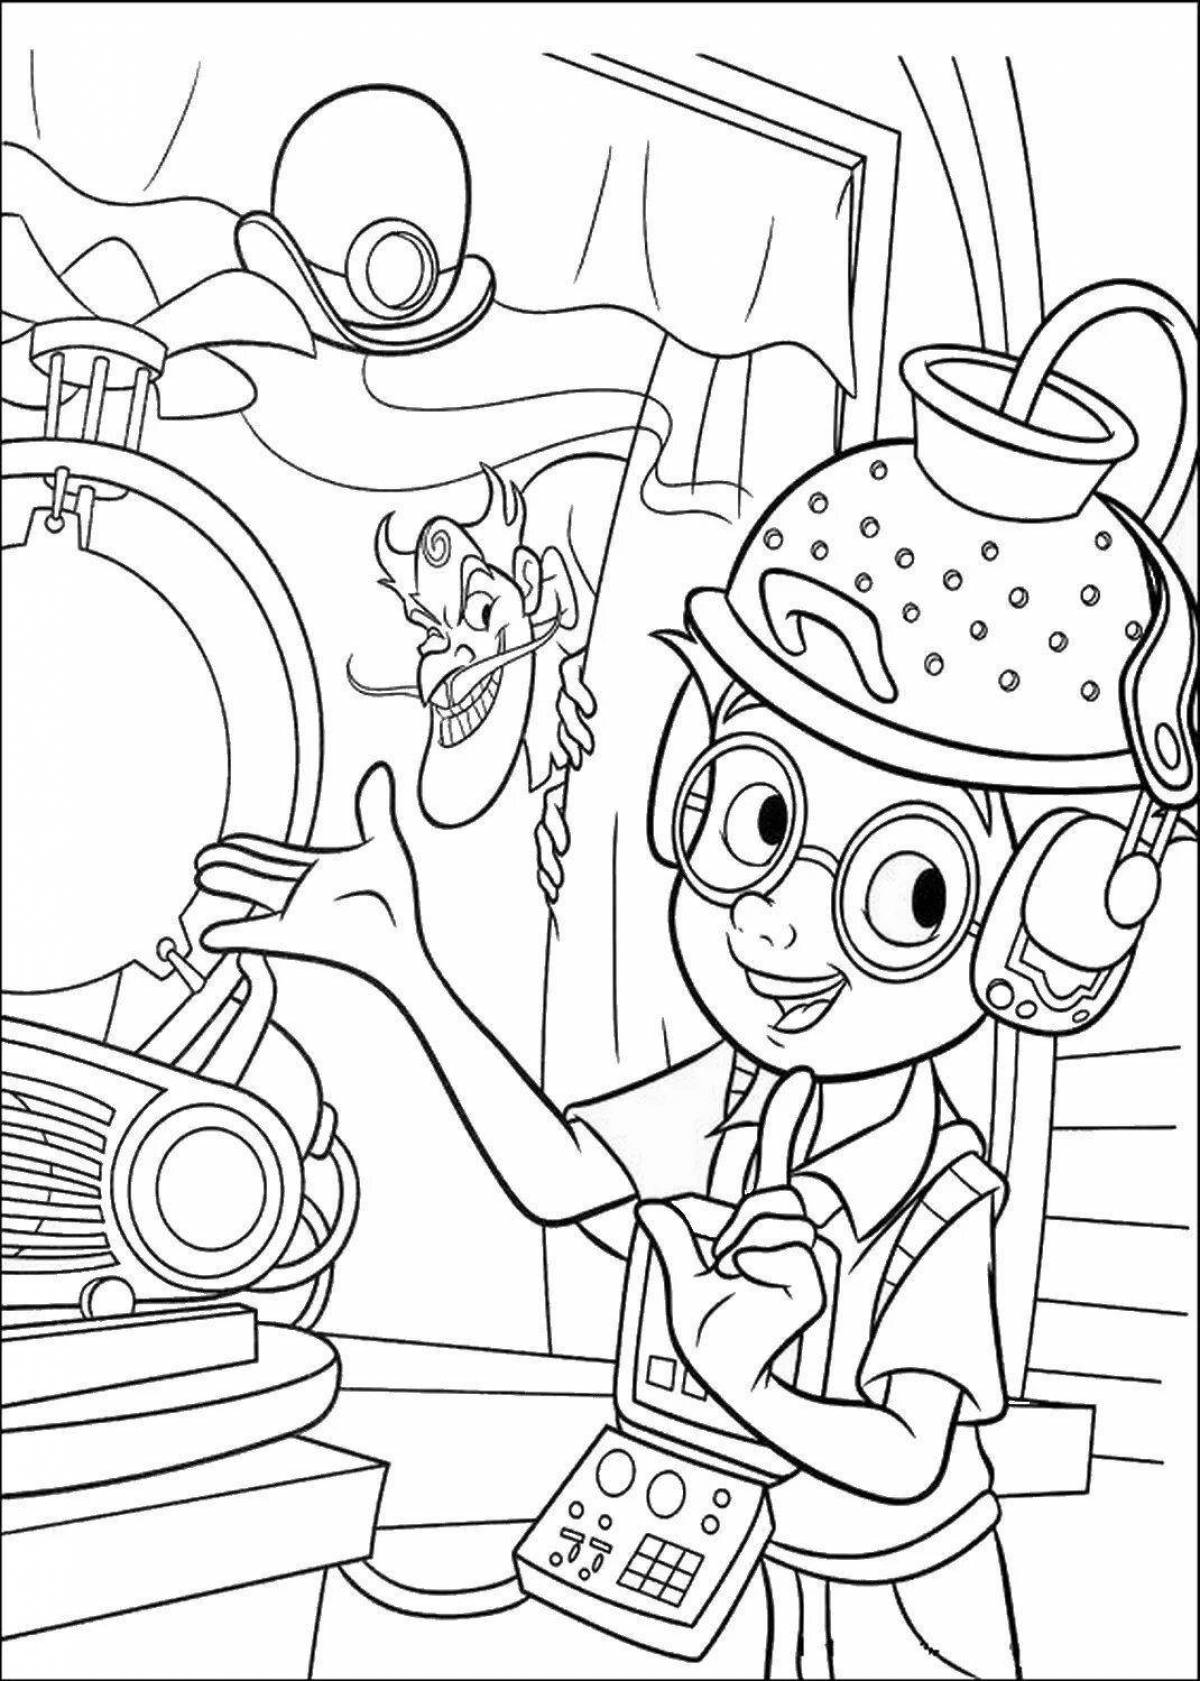 Coloring book for children's inventions obsessed with flowers